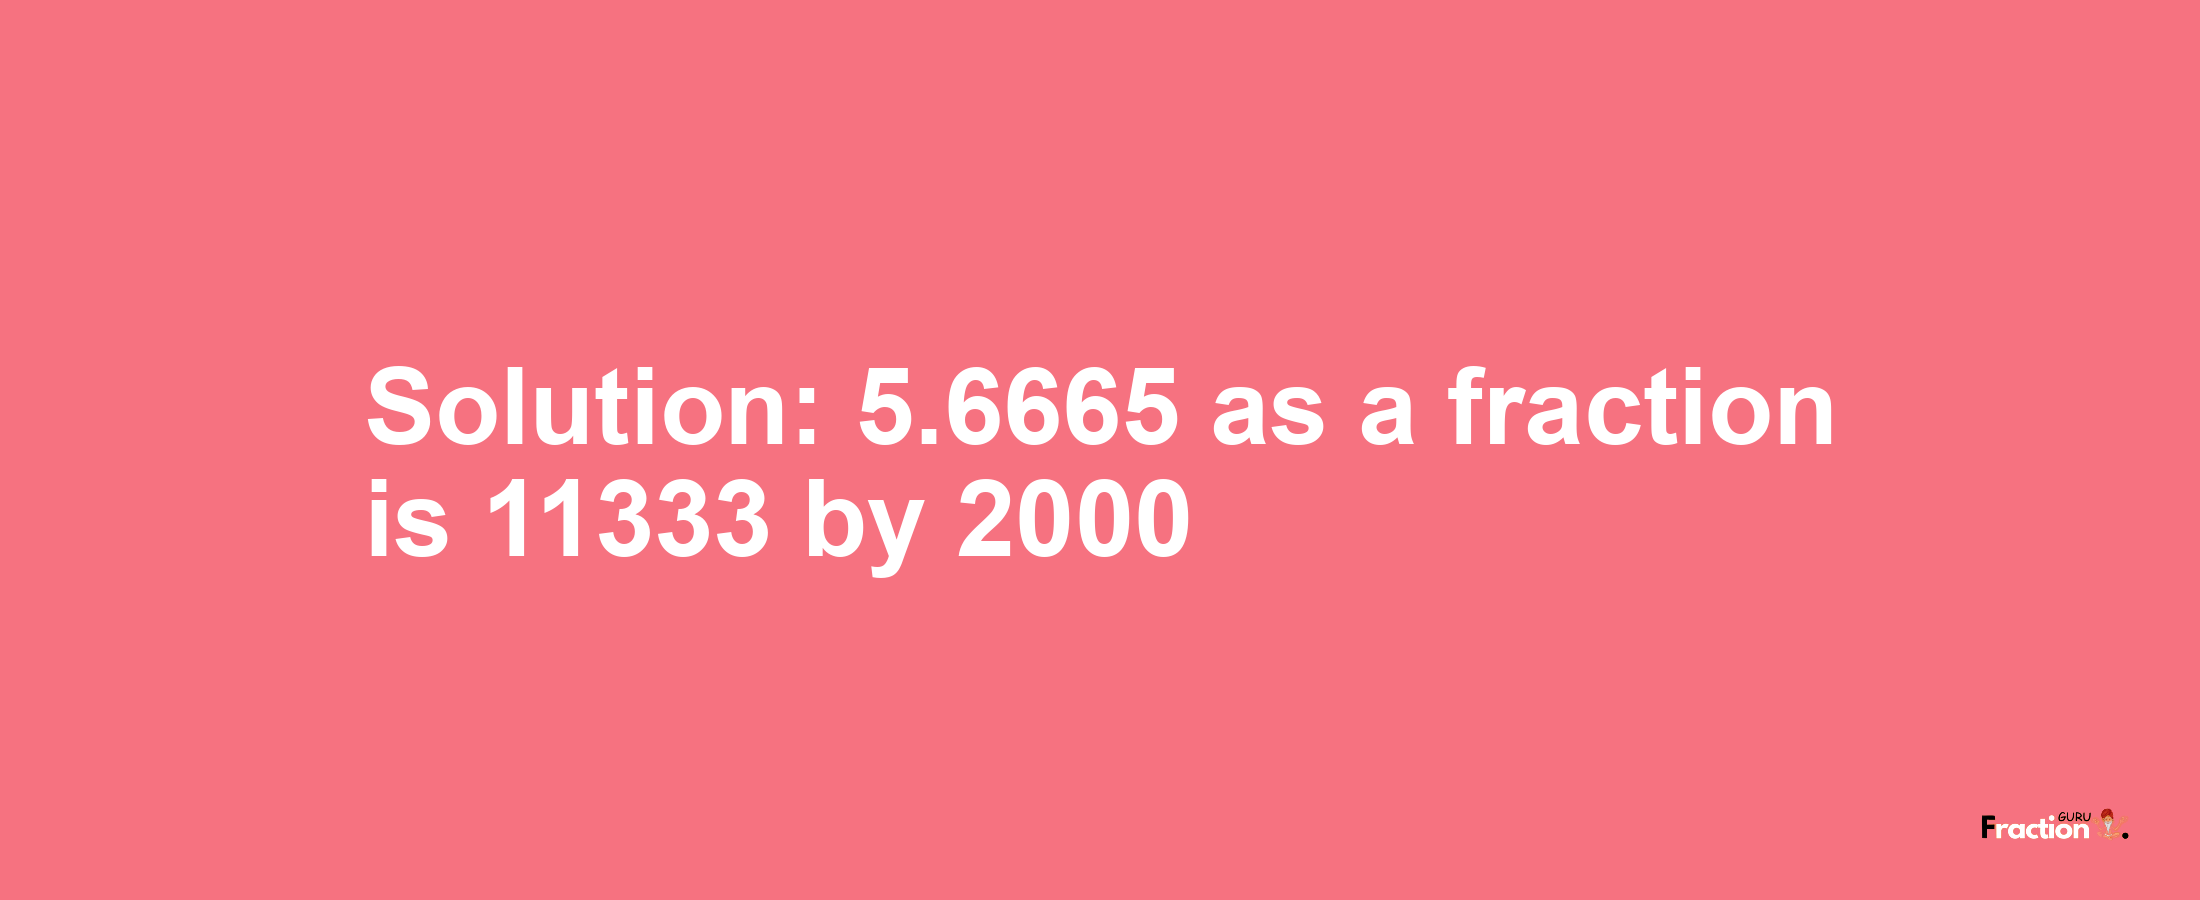 Solution:5.6665 as a fraction is 11333/2000